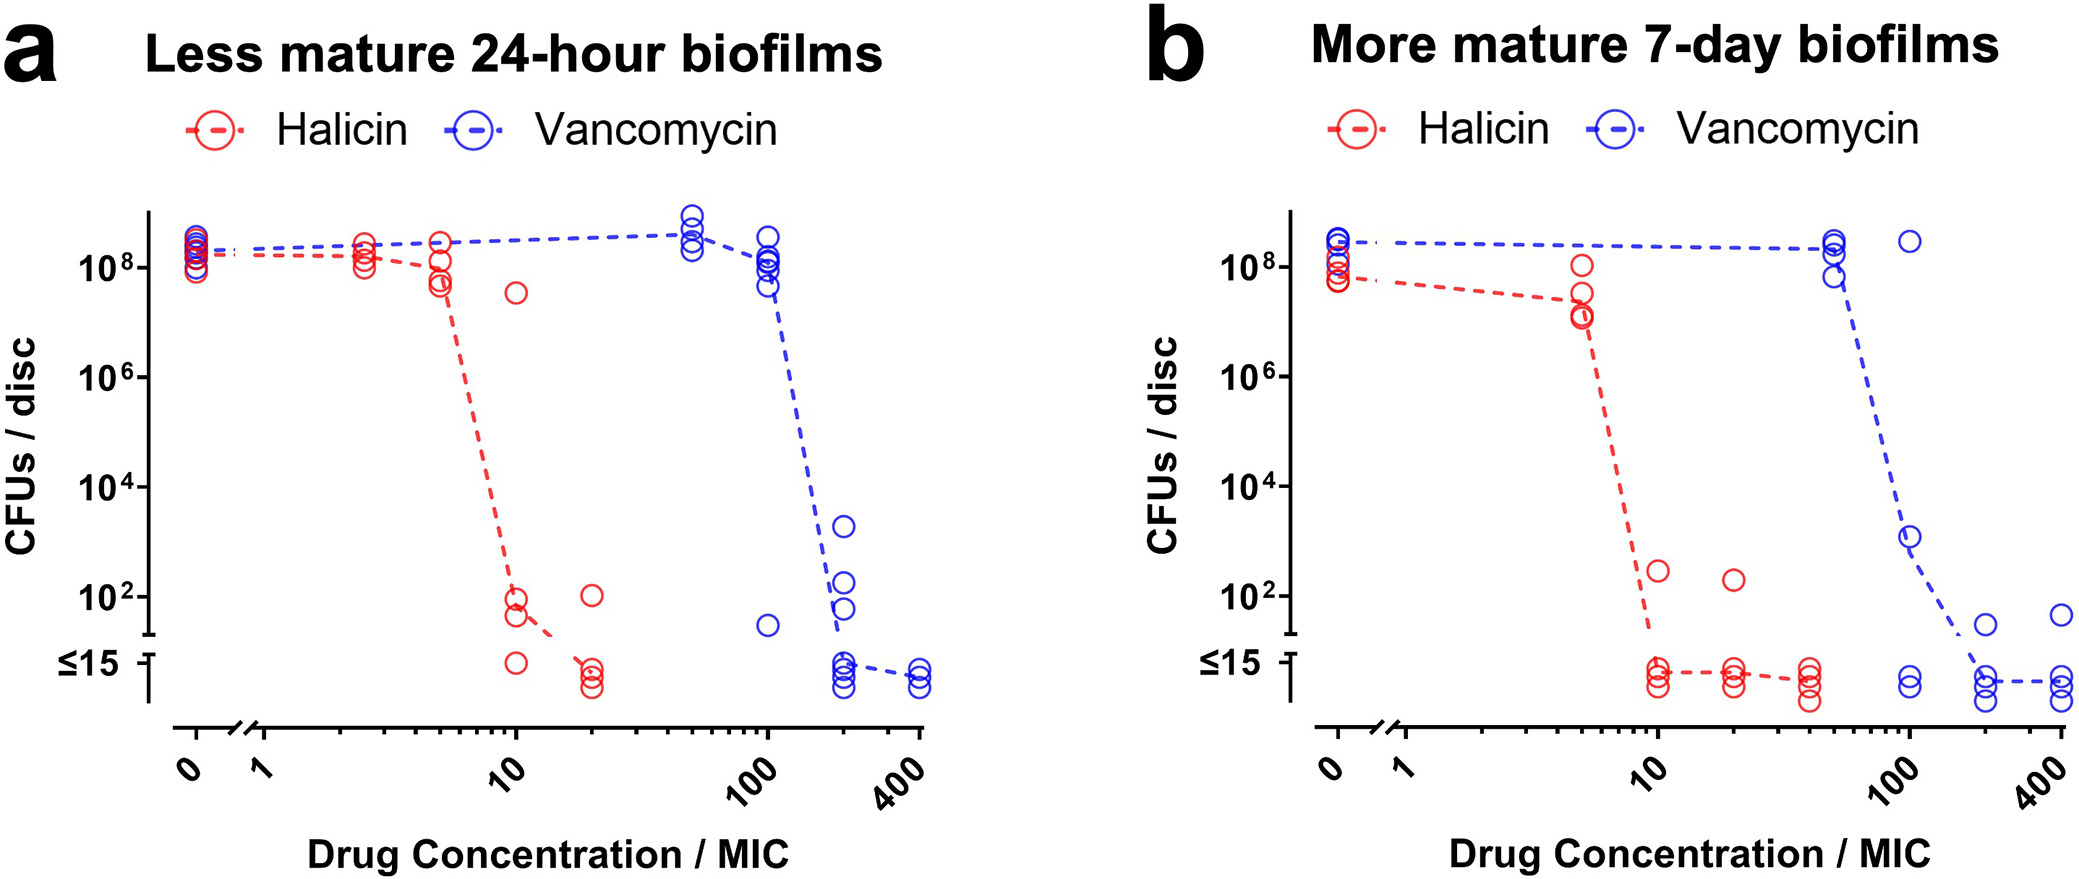 Fig. 2 
          Halicin remains active against Staphylococcus aureus-Xen36 biofilms grown on cobalt-chromium (Co-Cr) discs. a) Less mature 24-hour biofilms and b) more mature seven-day biofilms on Co-Cr discs were exposed to the indicated concentrations of halicin (red symbols) or vancomycin (blue symbols) for 20 hours. Effects on biofilm viability were determined by CFU assays. Dashed lines connect medians of four to seven independent experiments for each drug concentration. Each symbol denotes the median for each drug concentration from an independent experiment, with two to three Co-Cr discs per symbol. MIC, minimum inhibitory concentration.
        